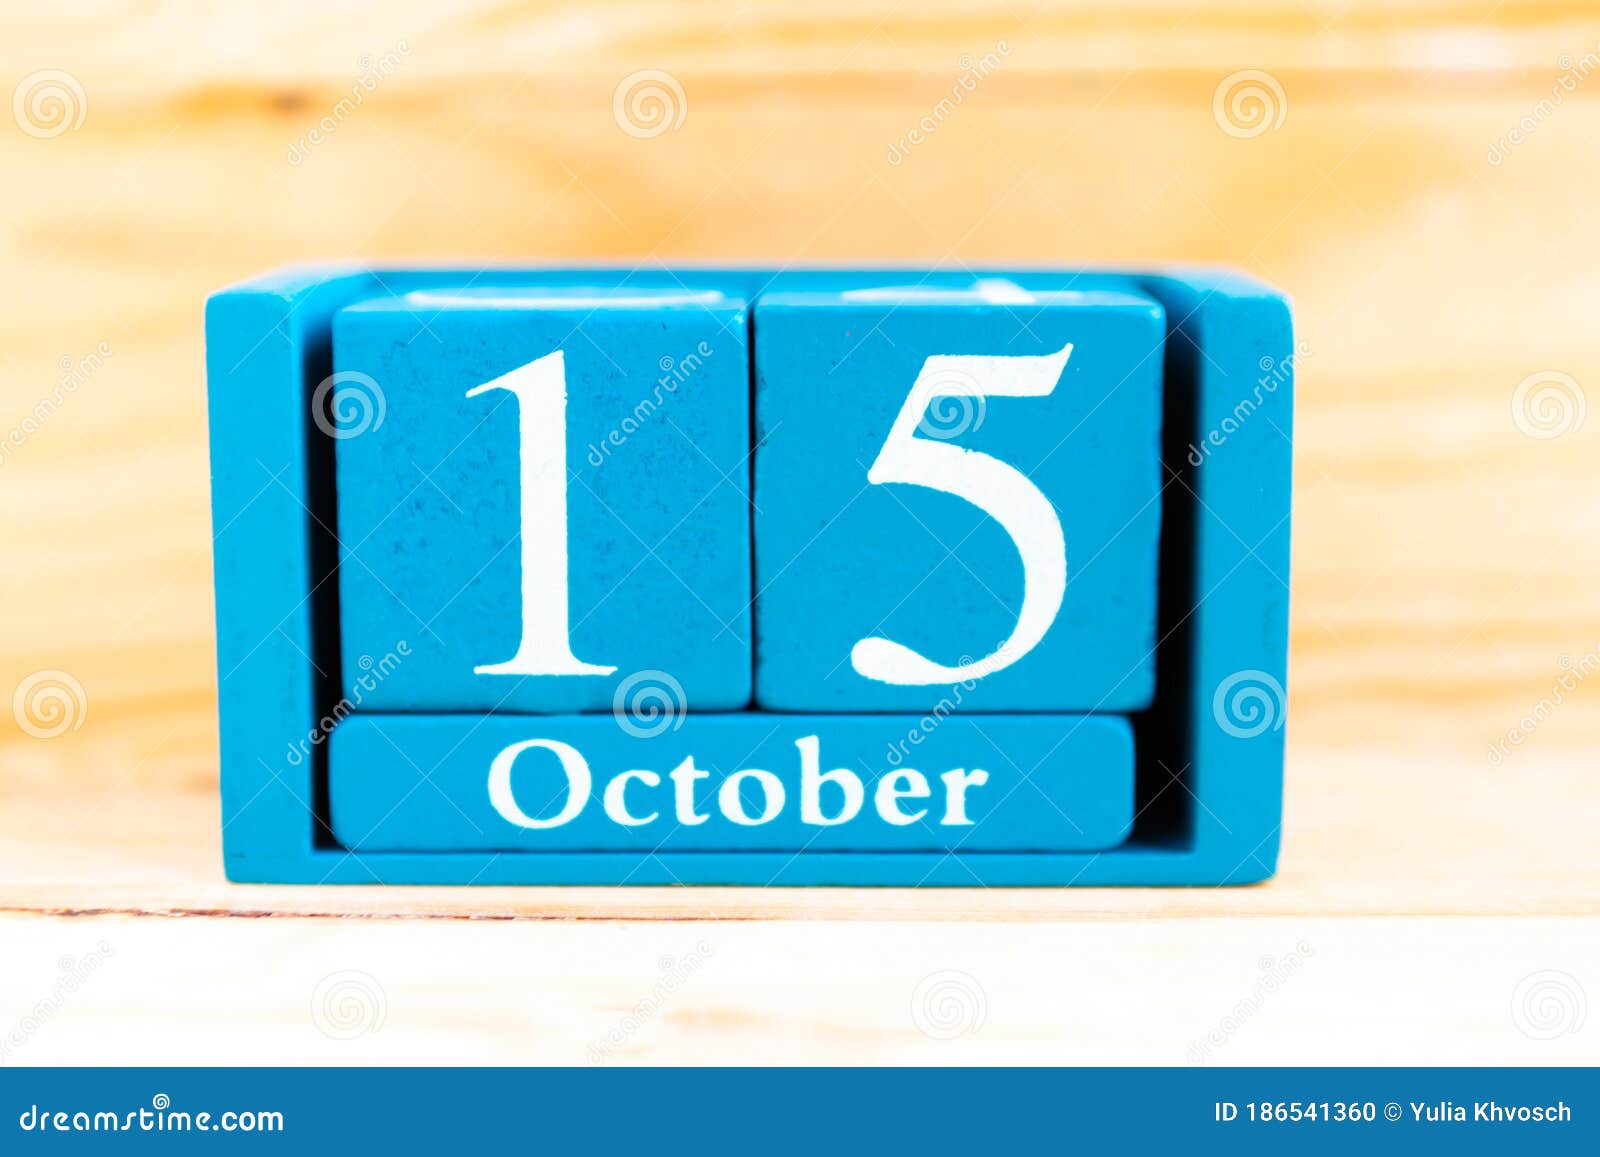 October 15th. Blue Cube Calendar With Month And Date Stock Photo